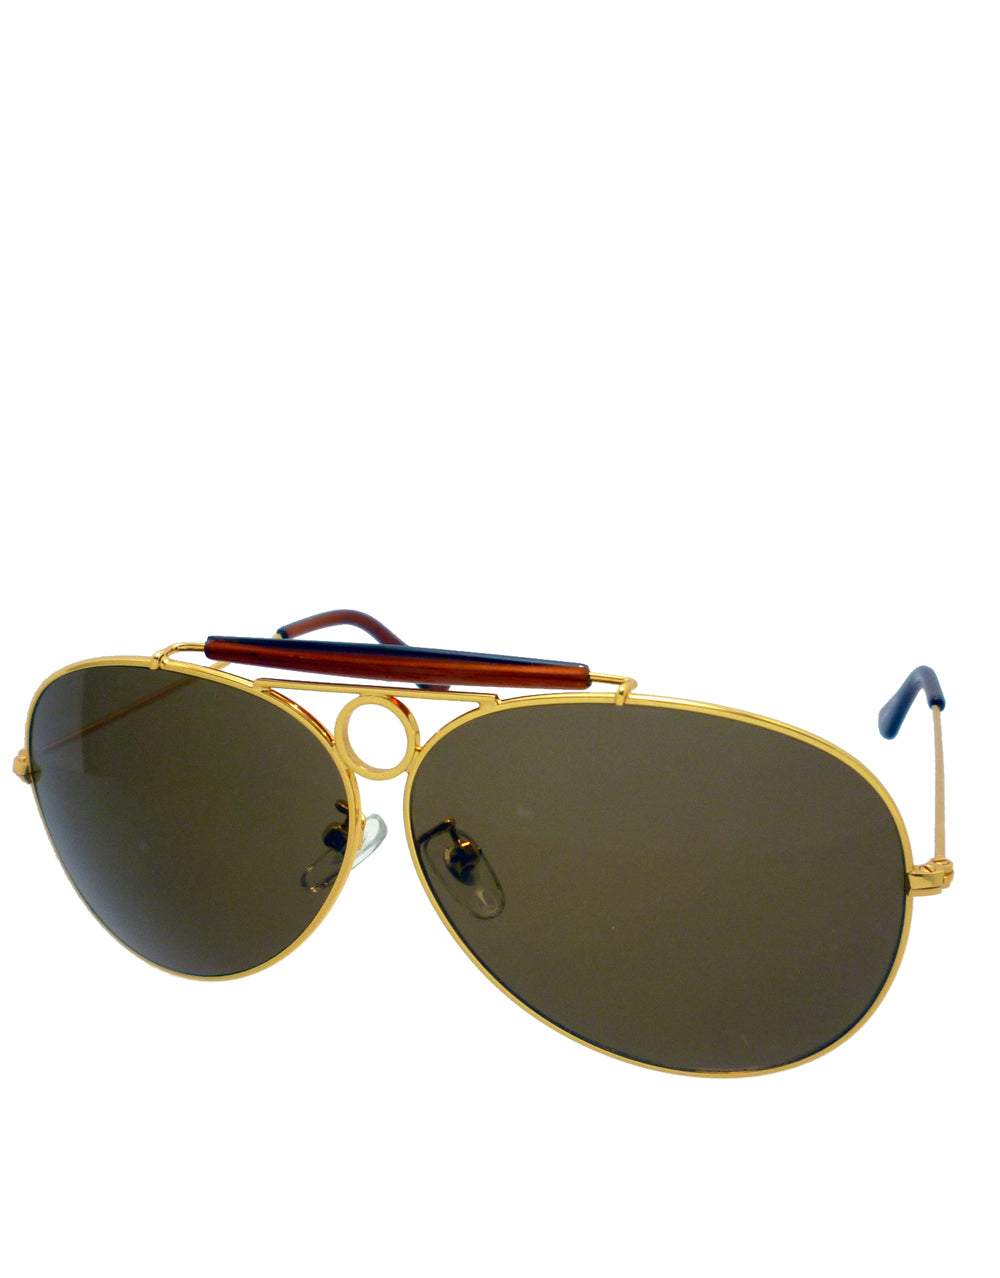 Magnum T.Selleck Style Aviator Sunglasses, Gold Frame / Brown Lens